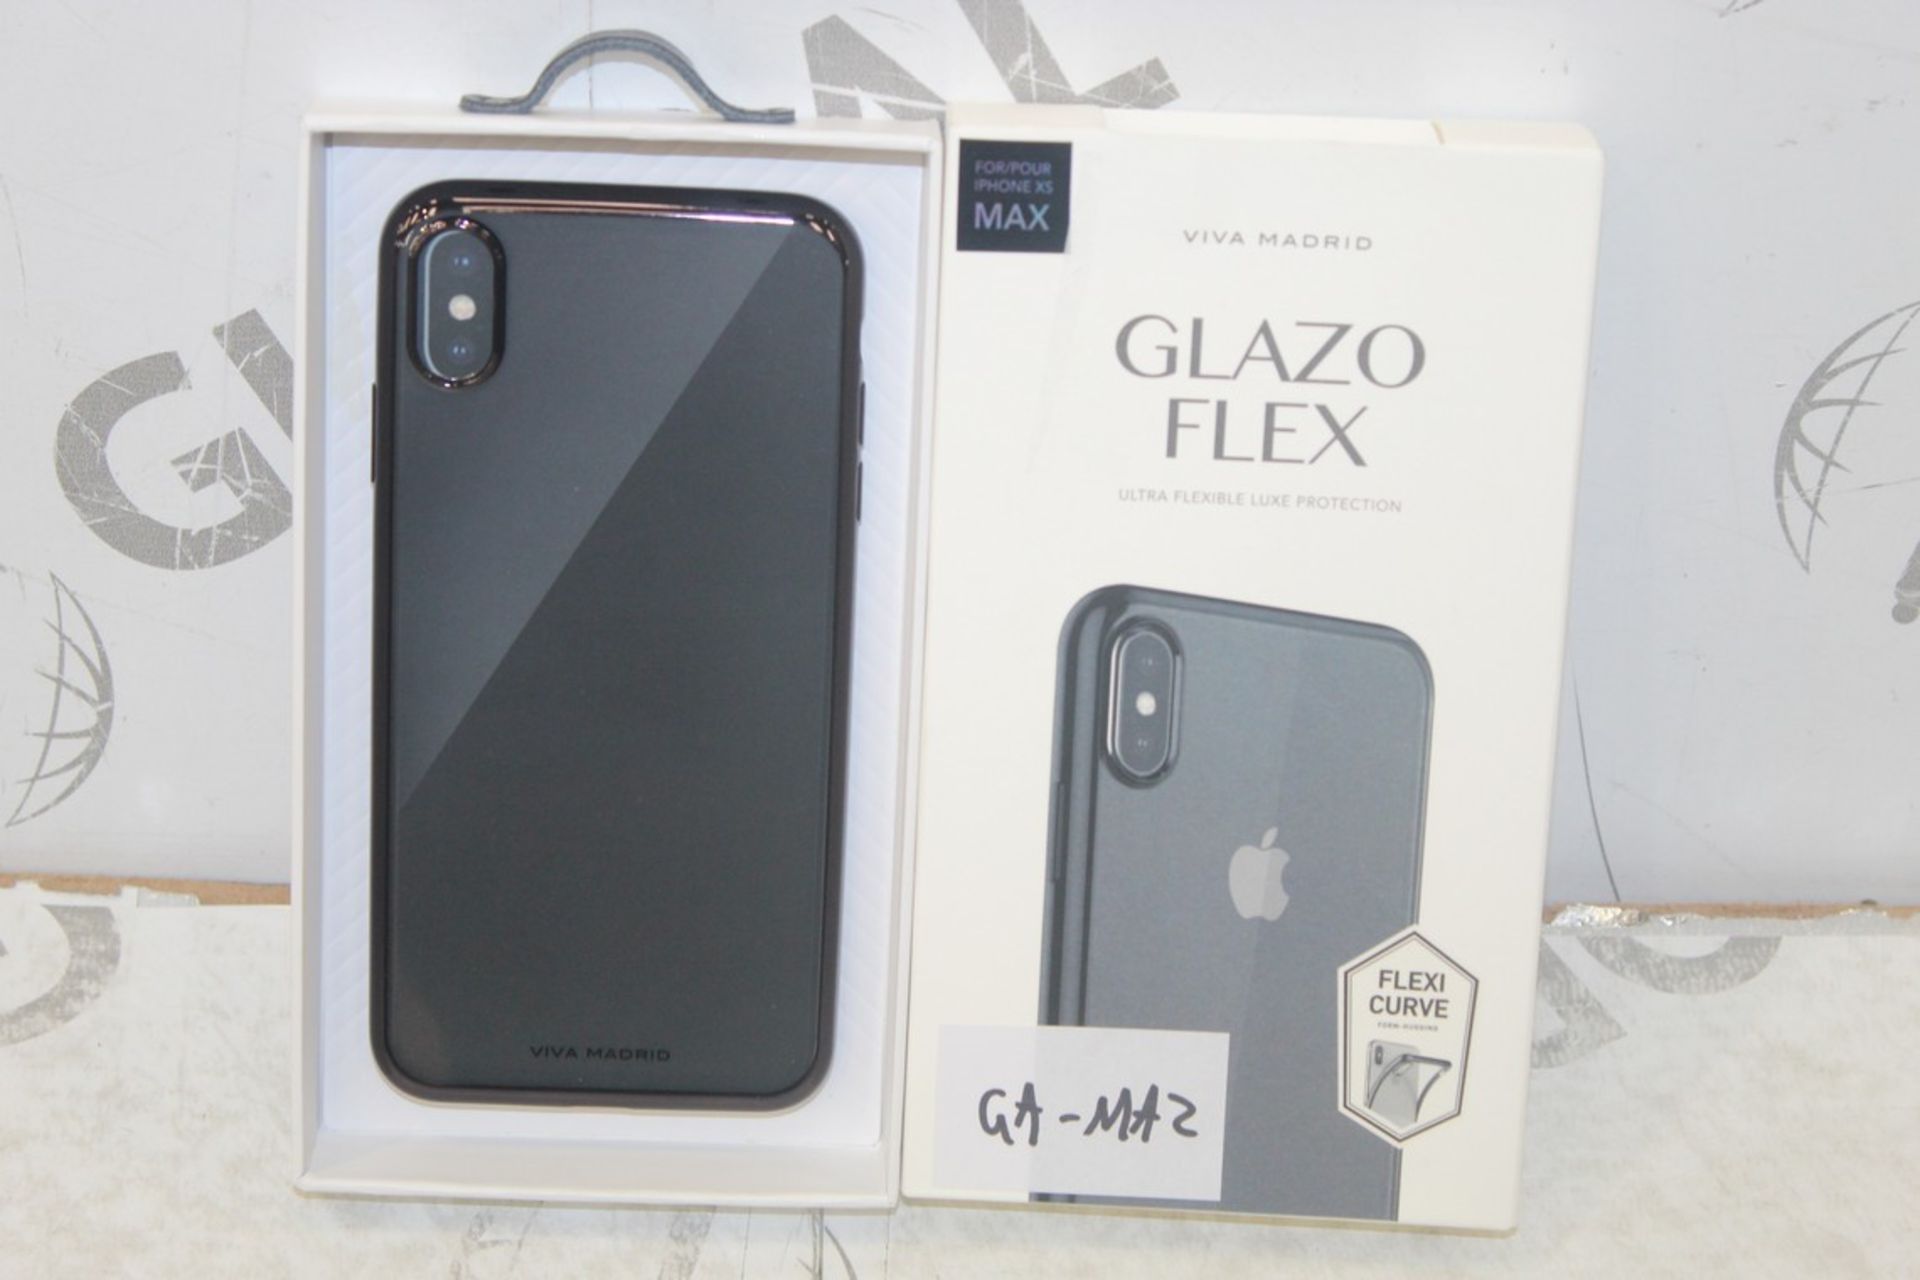 Lot To Contain 10 Viva Madrid Glazo Flex Ultra Flexible Cases Combined RRP £200 (Pictures Are For